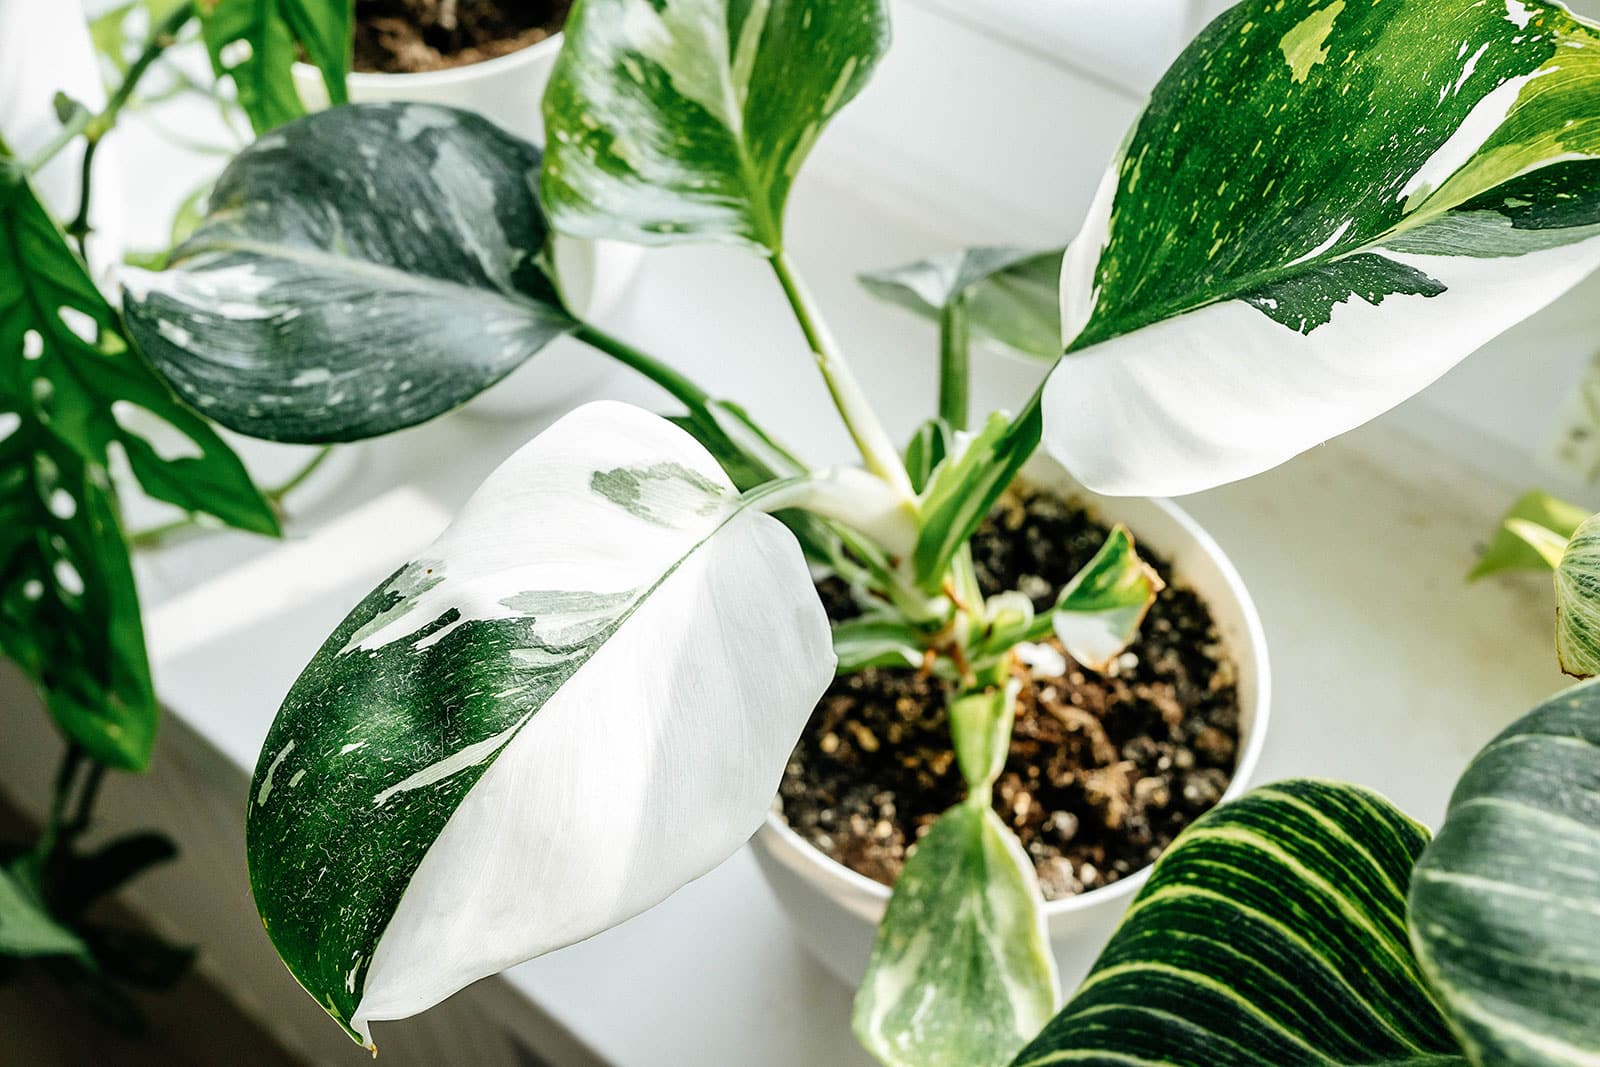 Philodendron 'White Princess' houseplant in a white pot